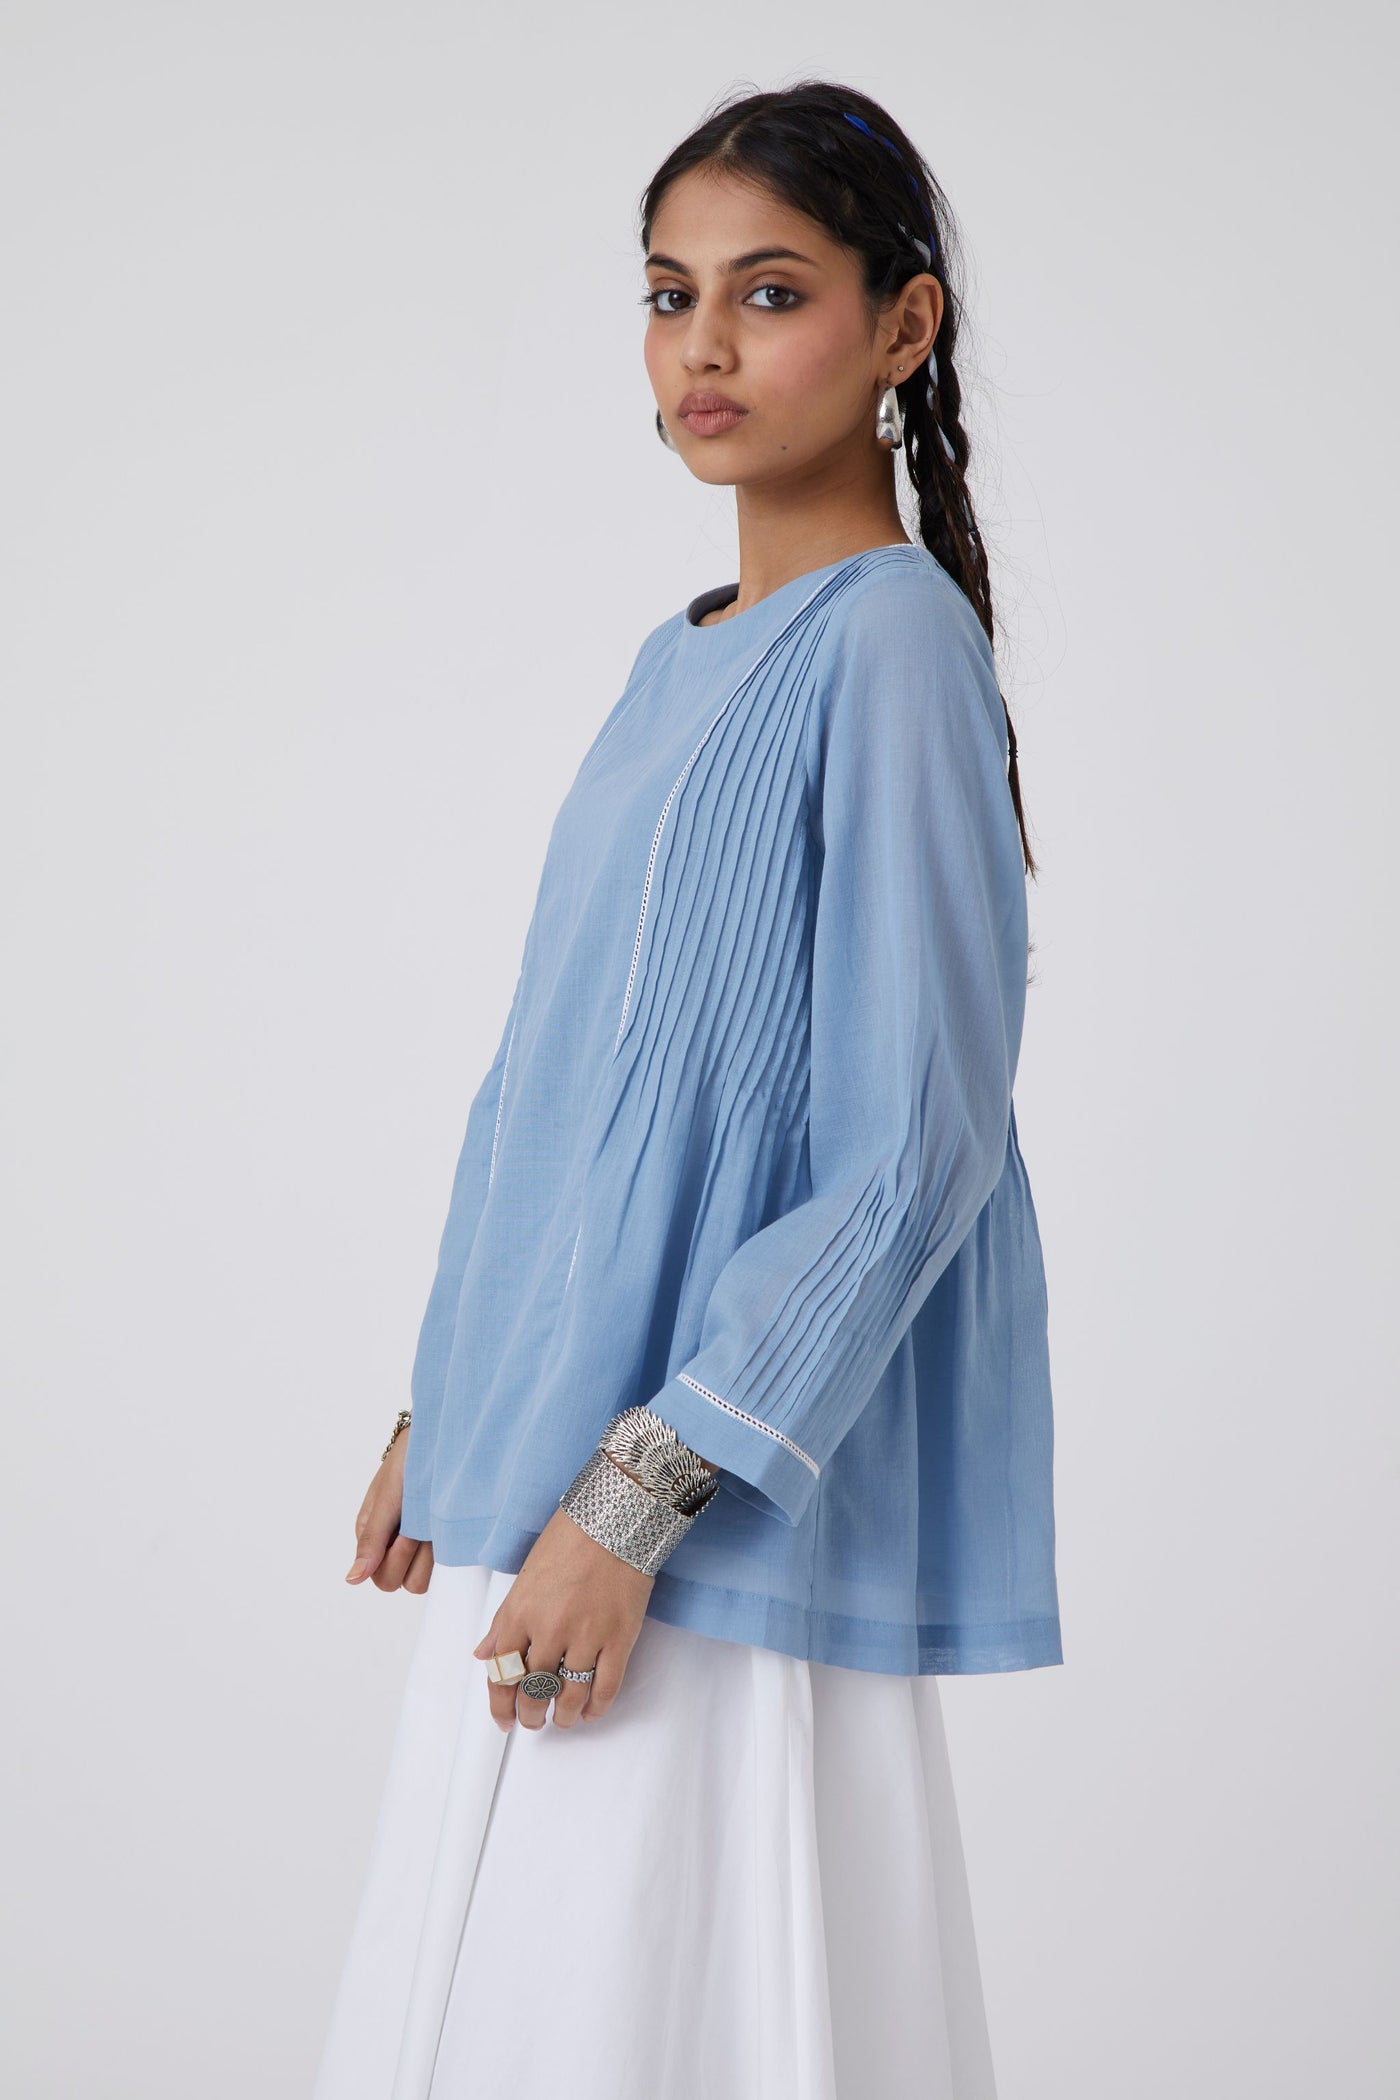 Saba Top | Blouse with Lace Inserts | Organic Cotton Voile